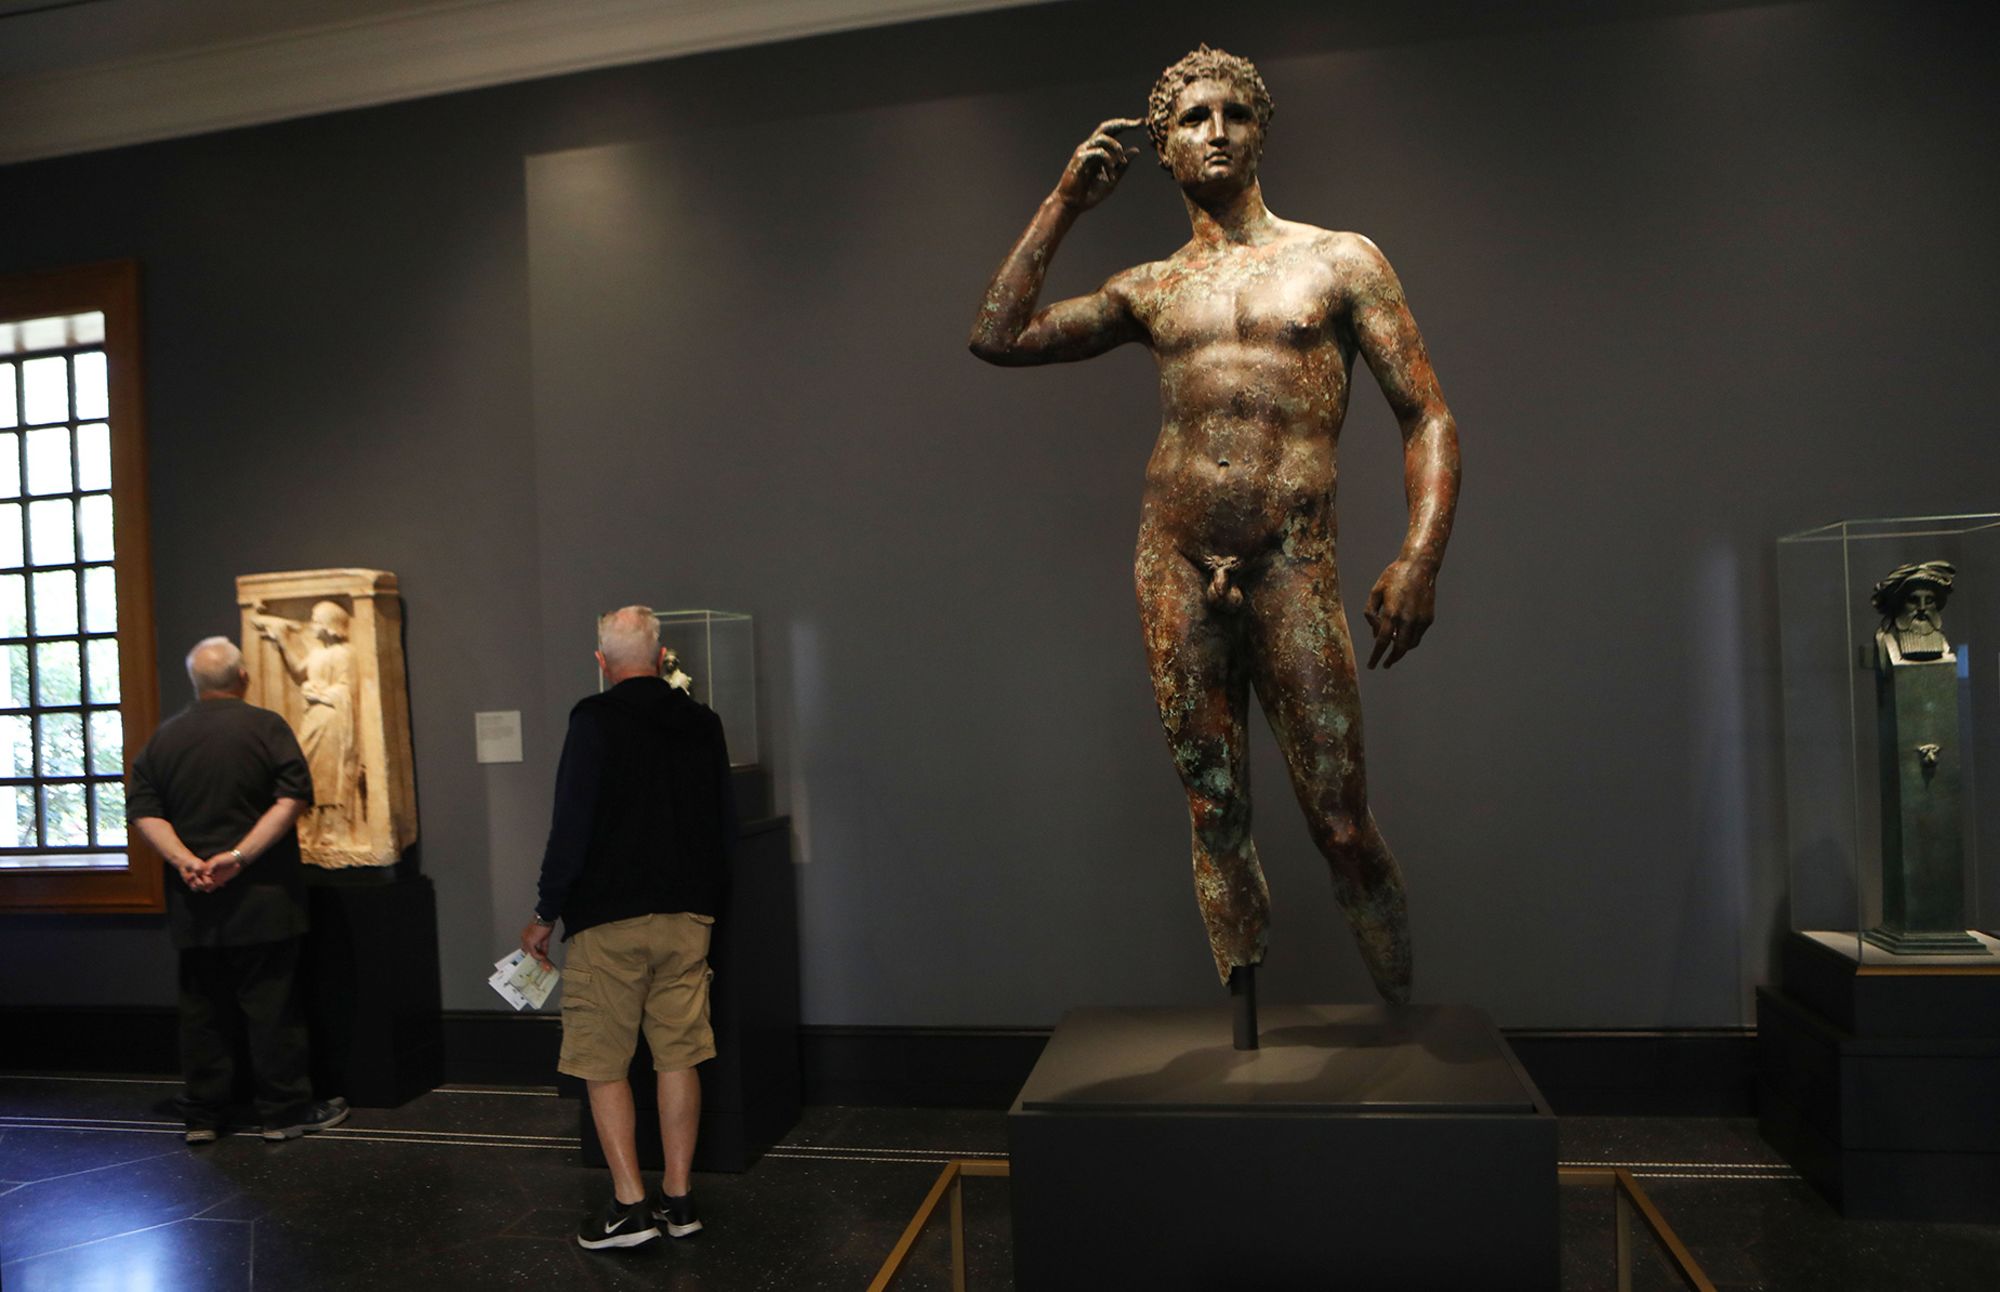 The ancient Greek statue known as "Victorious Youth" (center, right) is displayed at the Getty Villa in December 2018 in California. The European Court has found that Italy's claims to the contested bronze are legitimate.